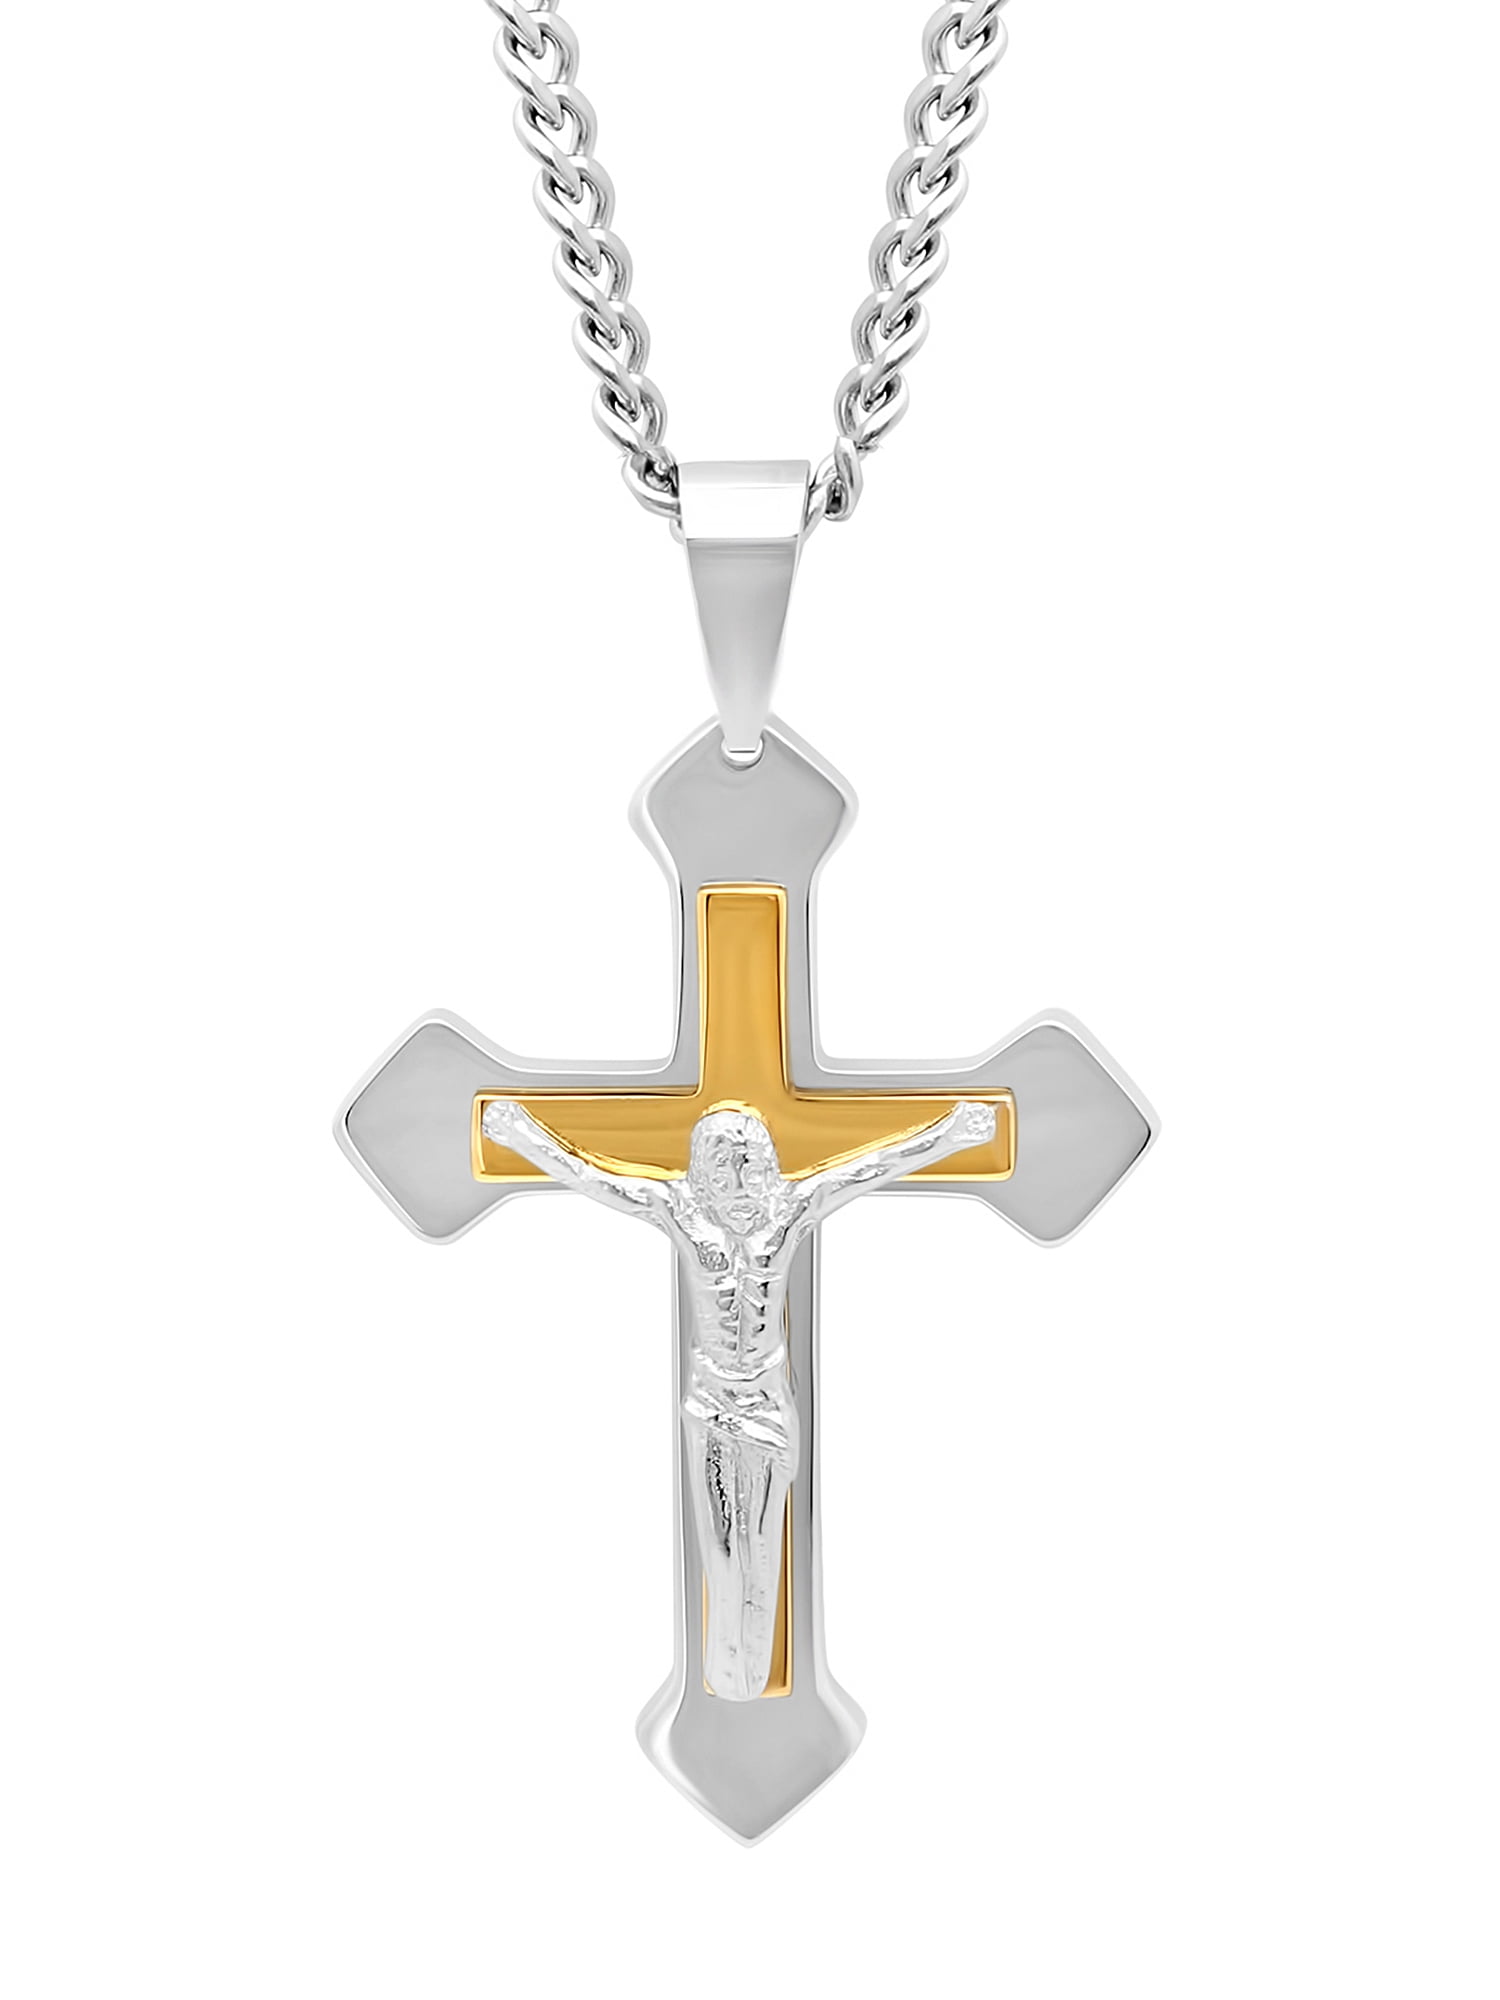 Stainless Steel Christ Cross Crucifix Pendant Necklace Chain for Men Women Gift